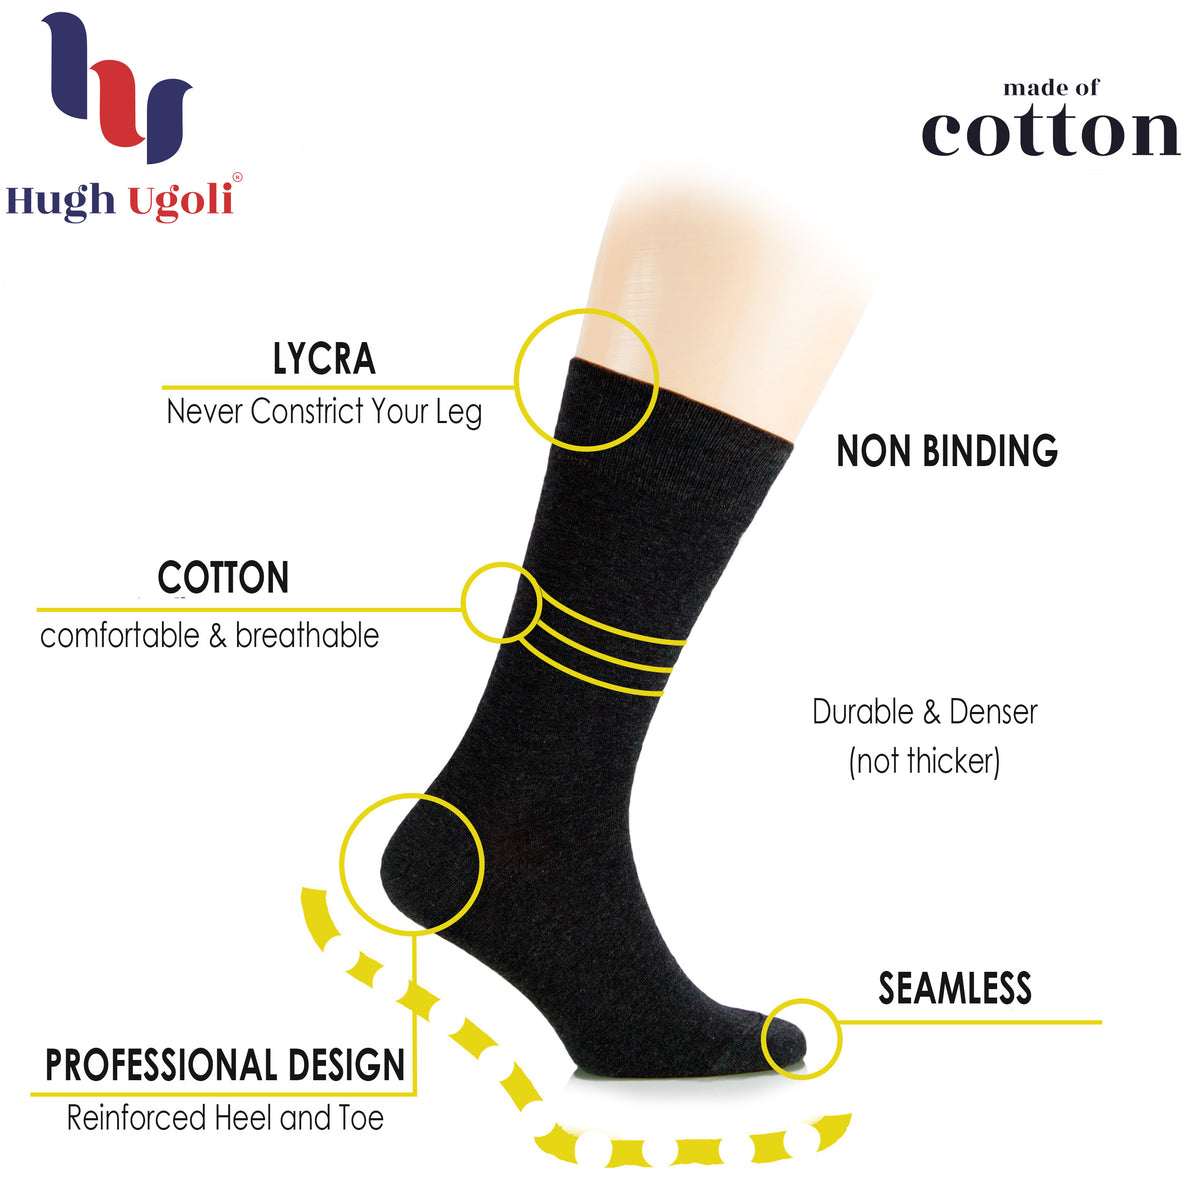 The image showcases the features of Women's Cotton Crew Socks, highlighting the use of soft and breathable cotton.